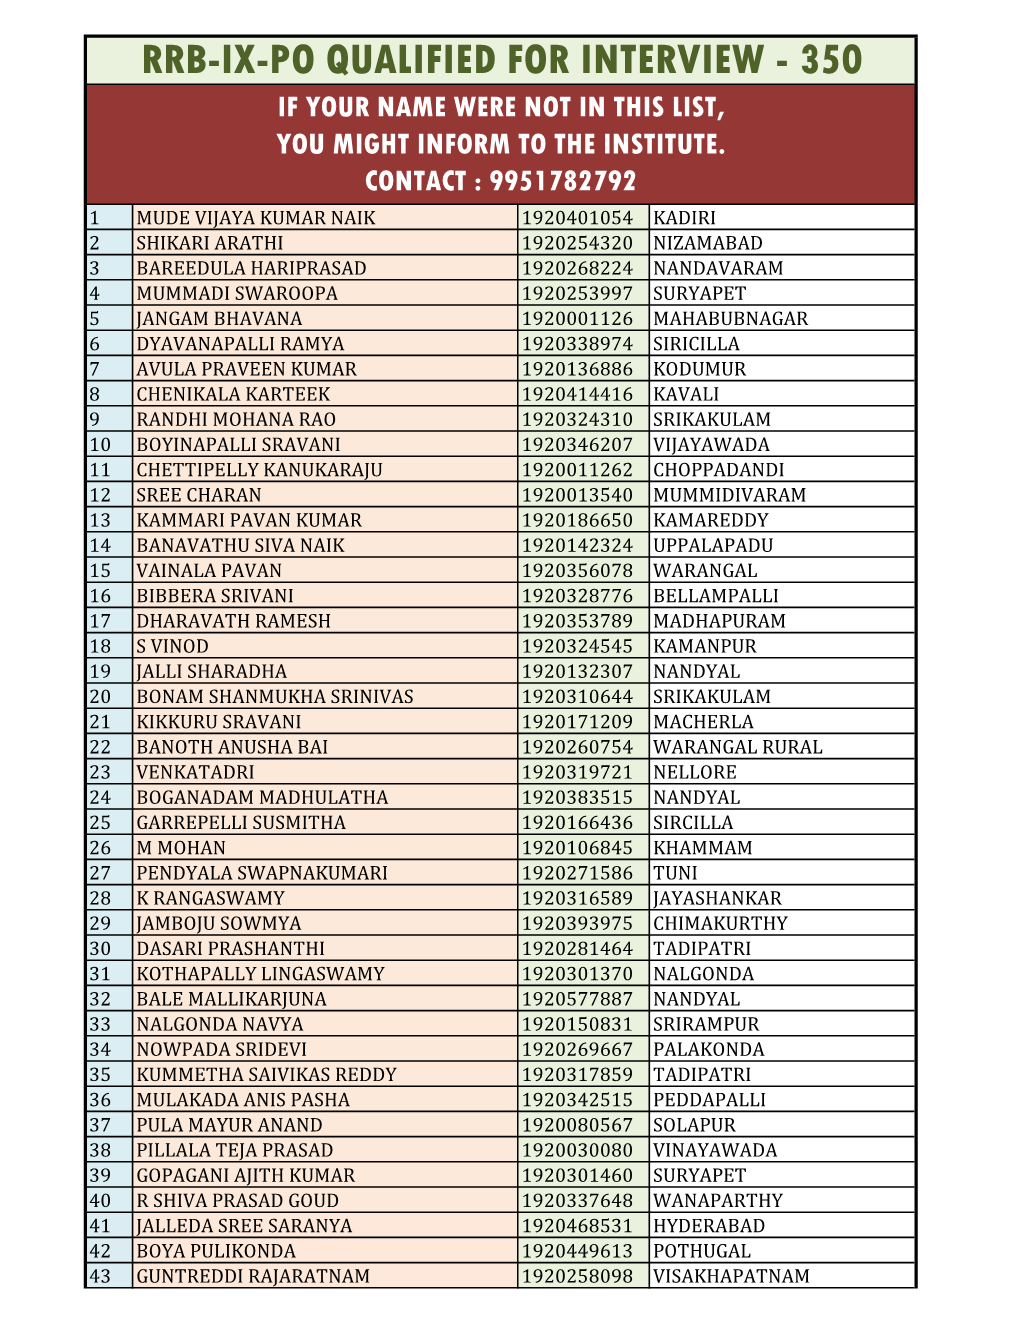 Rrb-Ix-Po Qualified for Interview - 350 If Your Name Were Not in This List, You Might Inform to the Institute